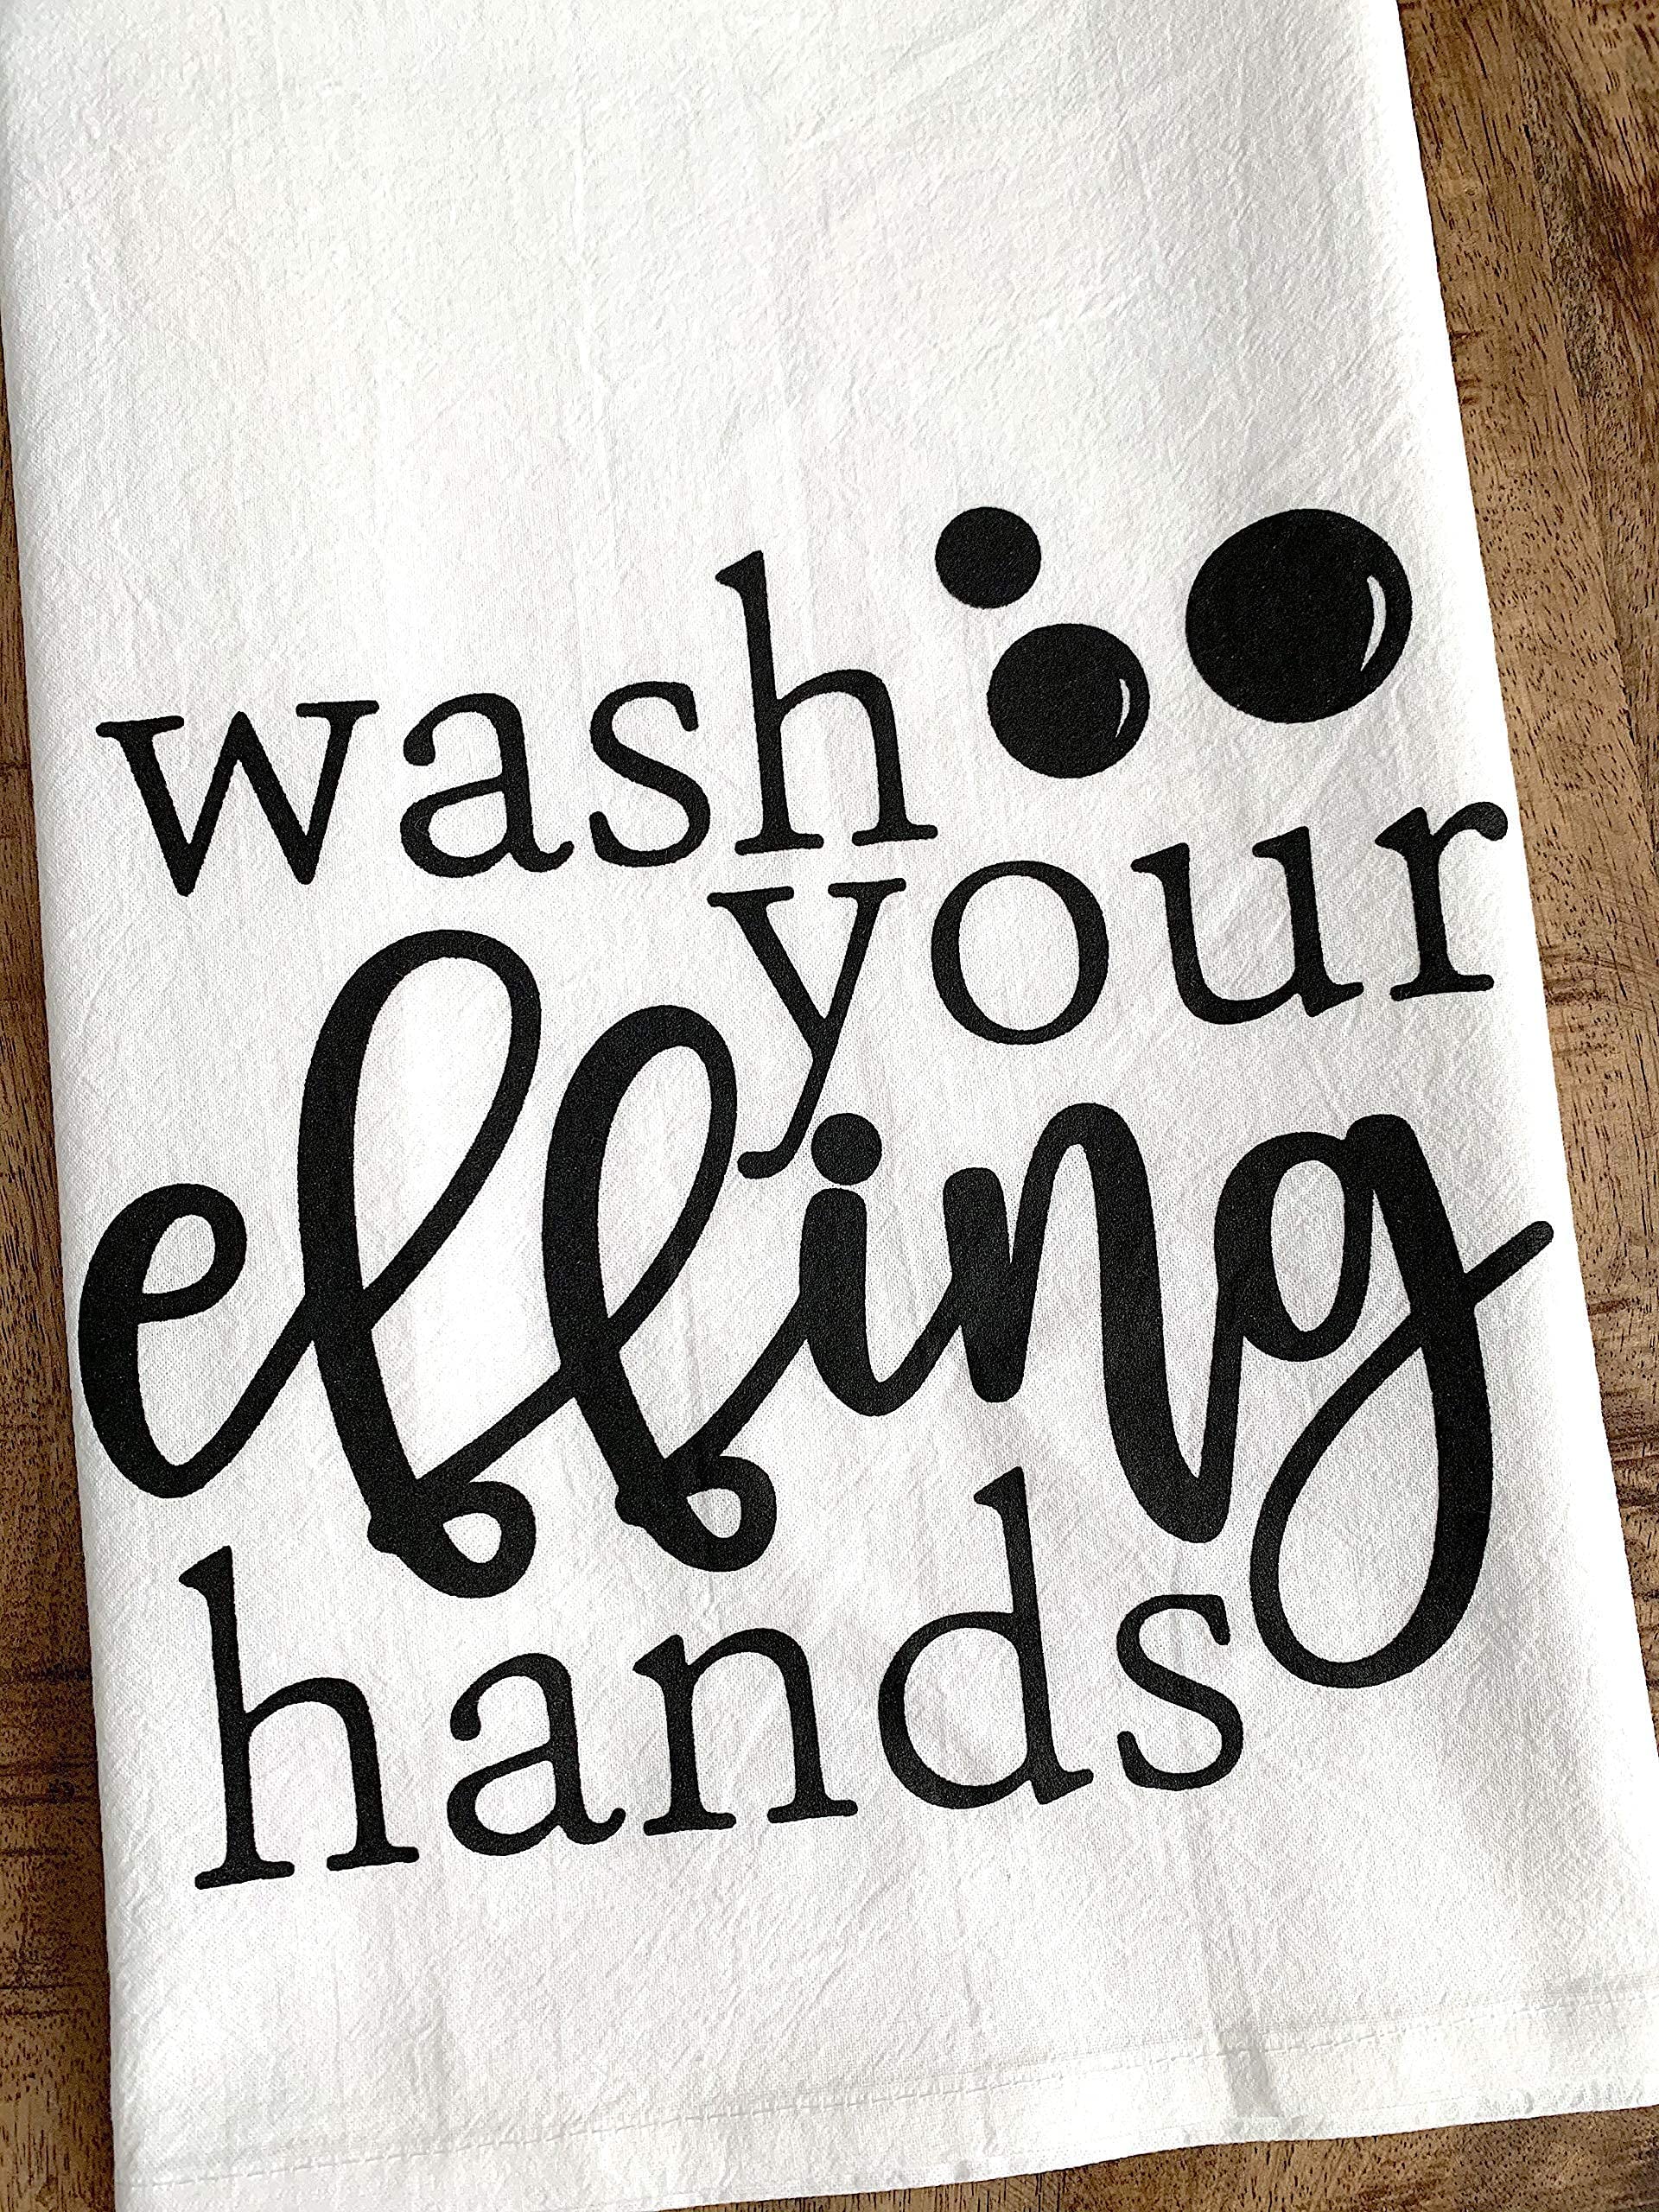 Handmade Funny Bathroom Towel - 100% Cotton Funny Flour Sack Wash Your Hands Towel for Bath - 28x28 Inch Hostess Housewarming Christmas Mother’s Day Birthday Gift (Wash Your Effing Hands)